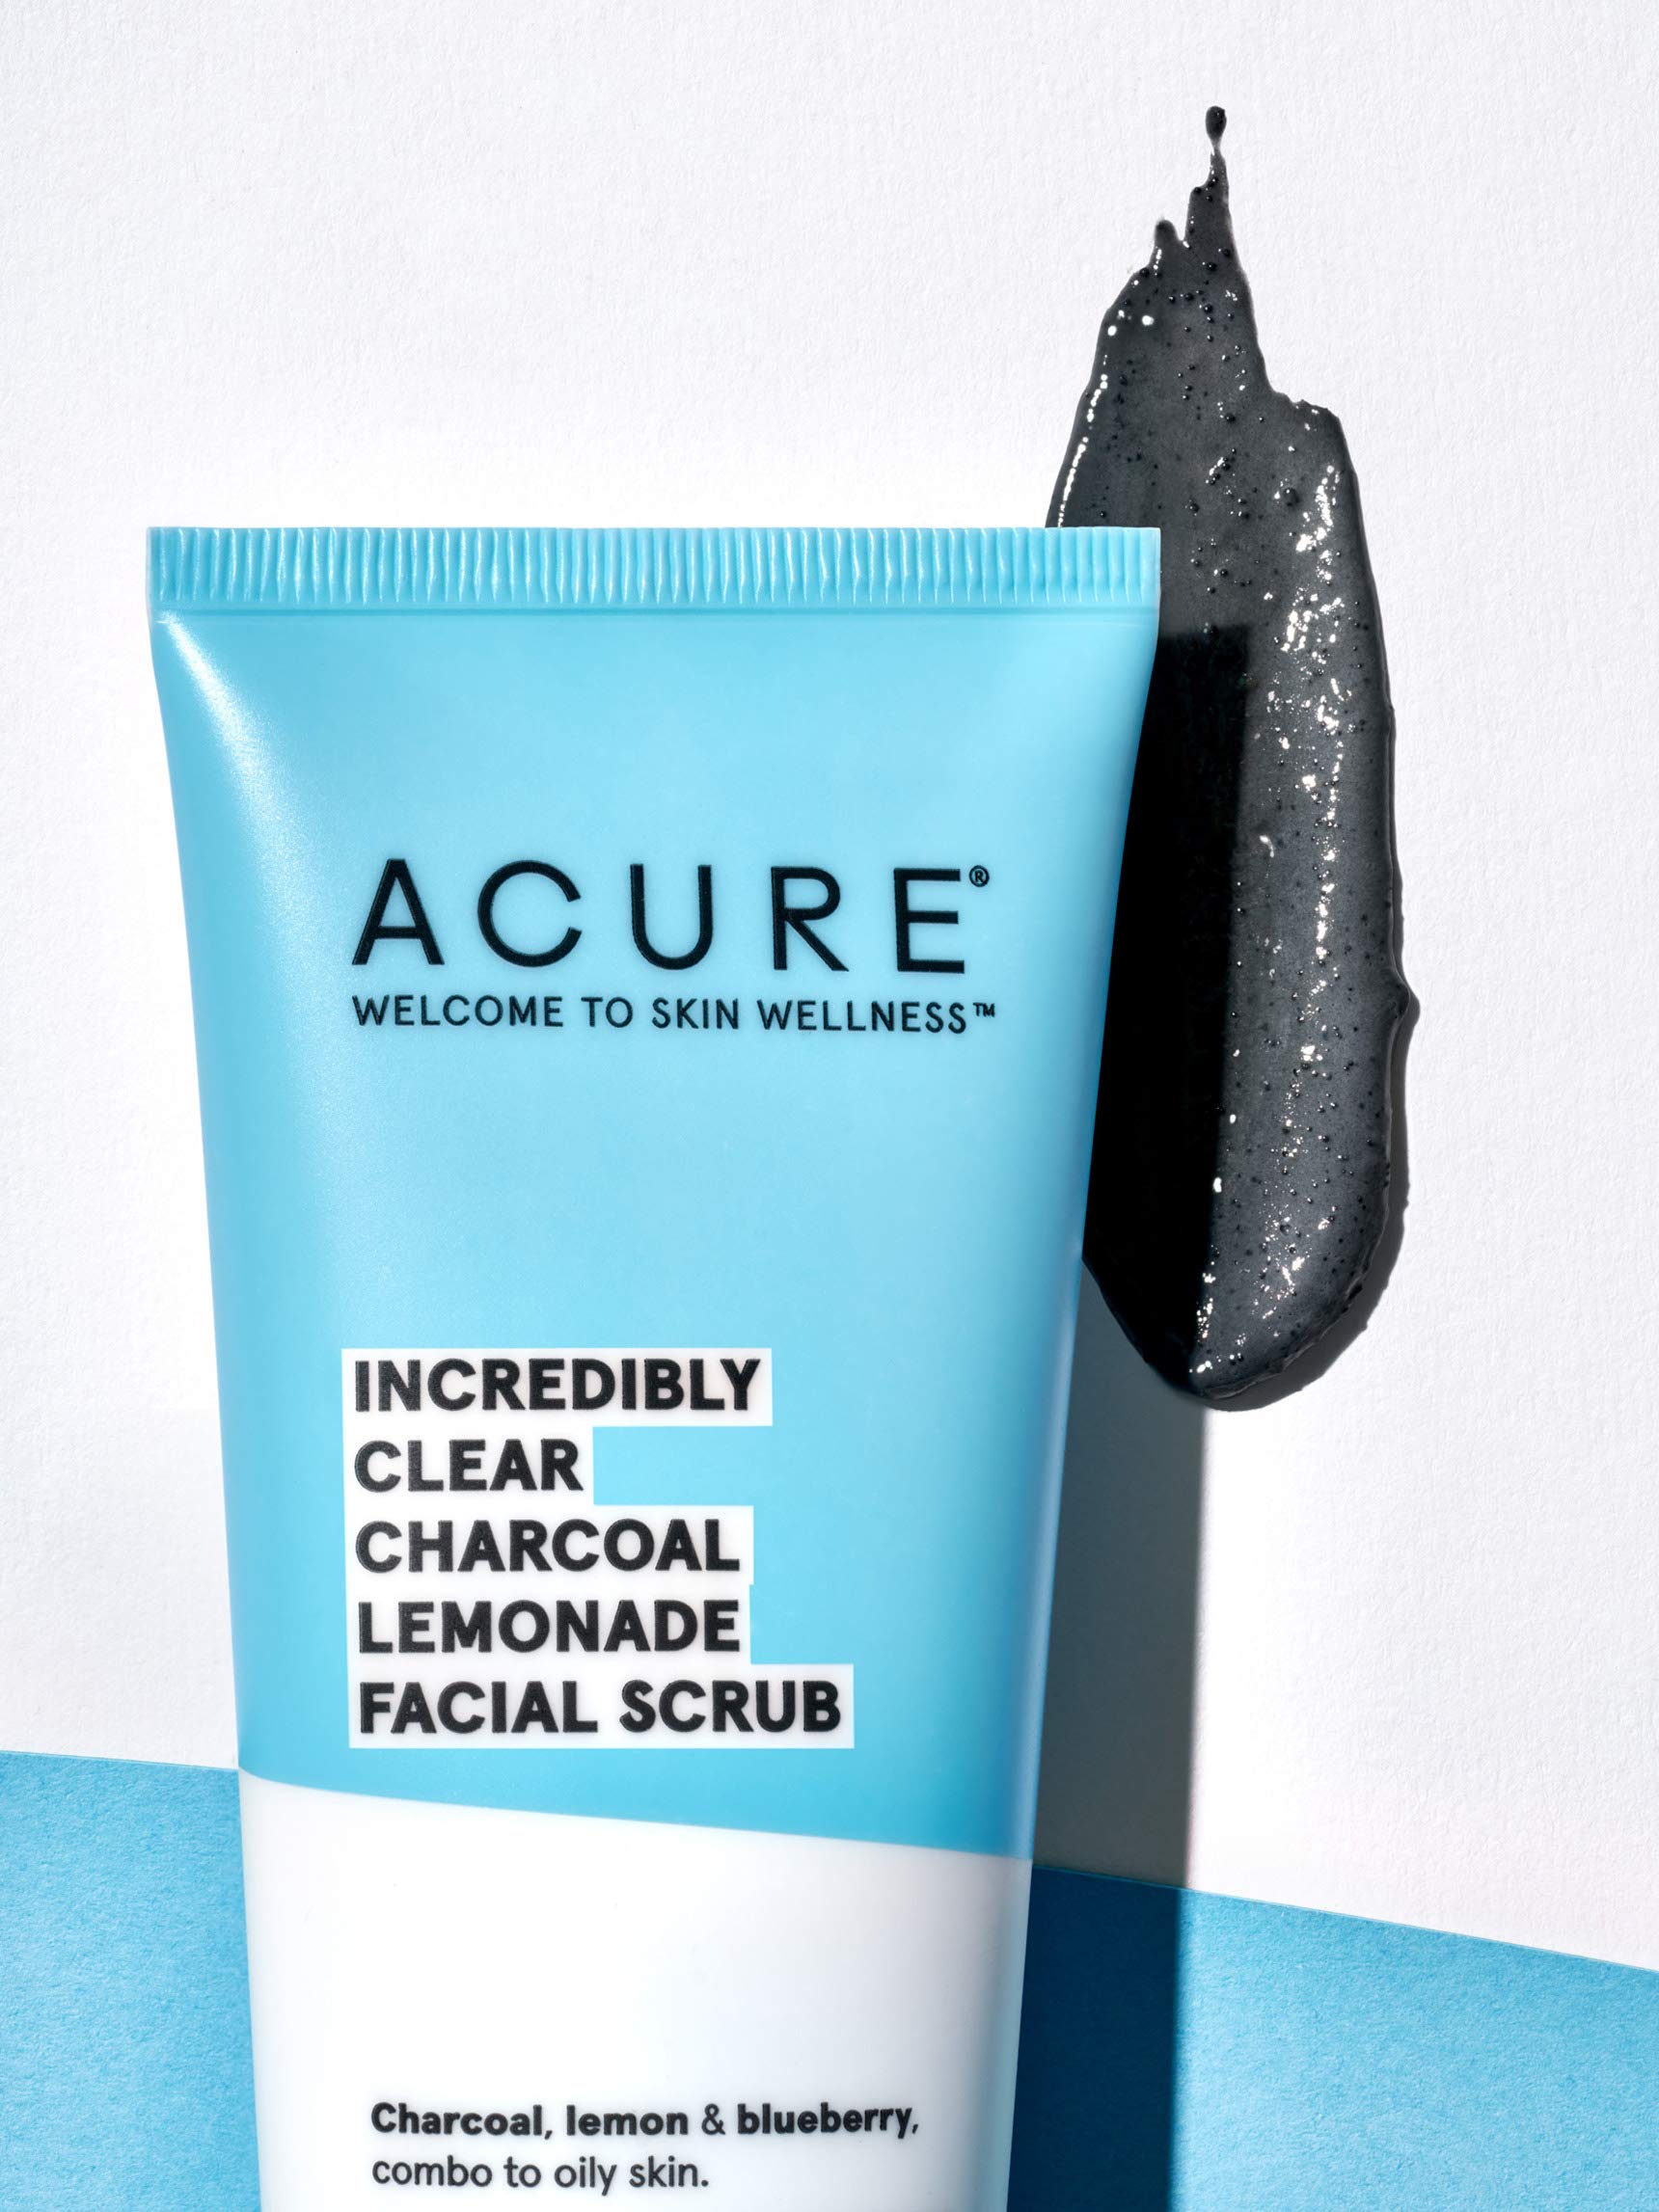 ACURE Incredibly Clear Charcoal Lemonade Facial Scrub | 100% Vegan | For Oily to Normal & Acne Prone Skin | Charcoal, Lemon & Blueberry - Exfoliates & Detoxifies | 4 Fl Oz (Packaging May Vary)